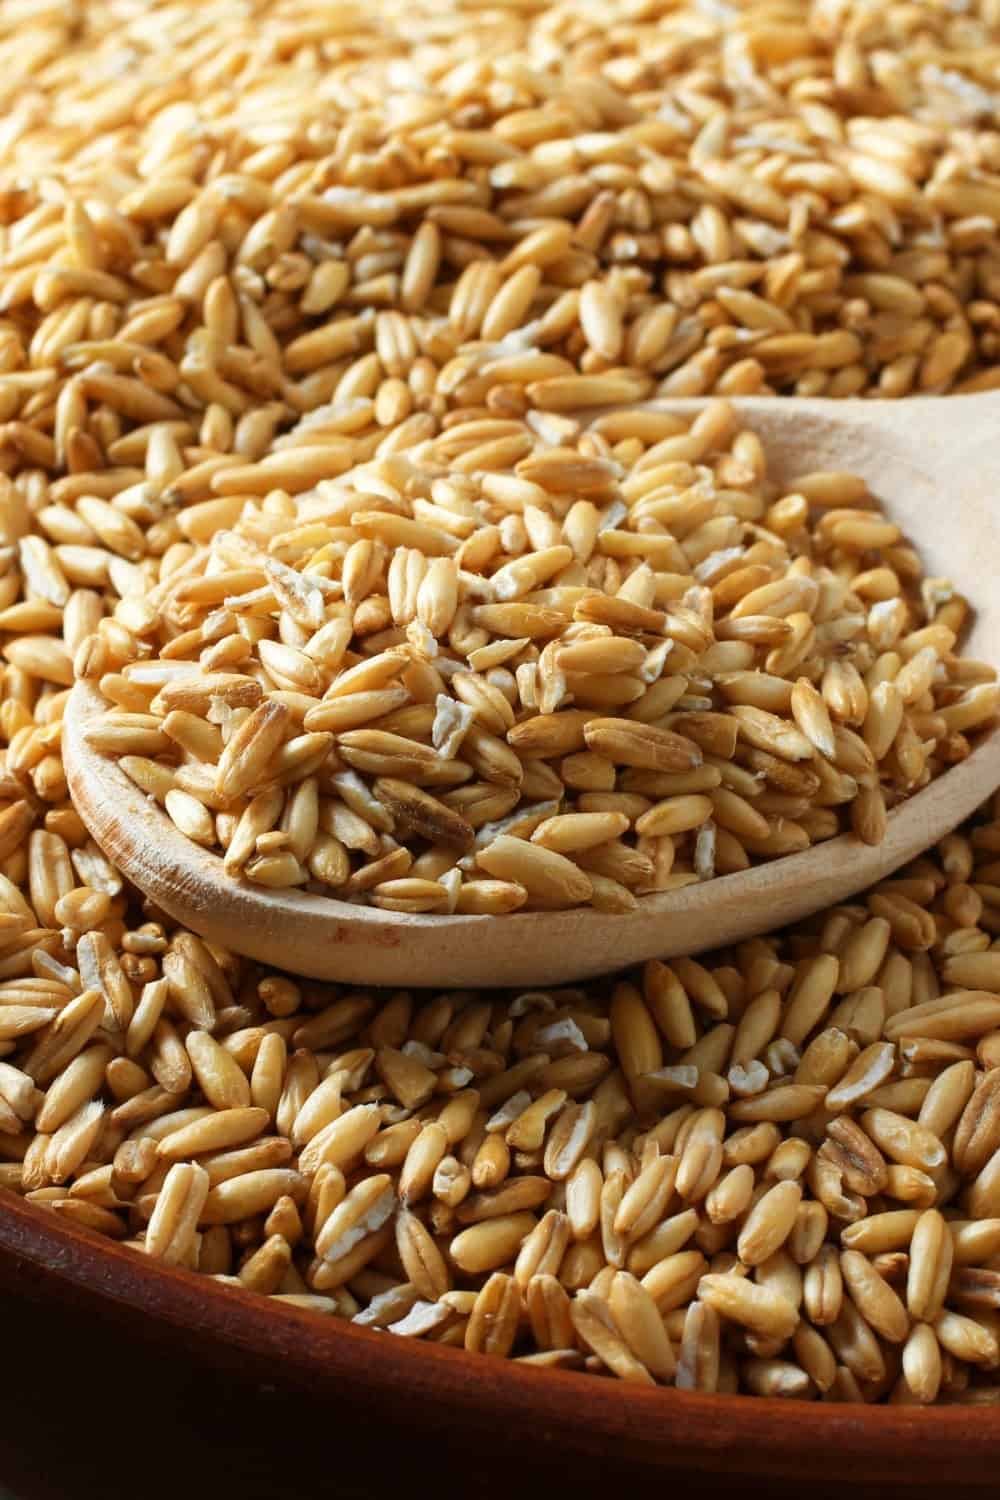 Barley on the table